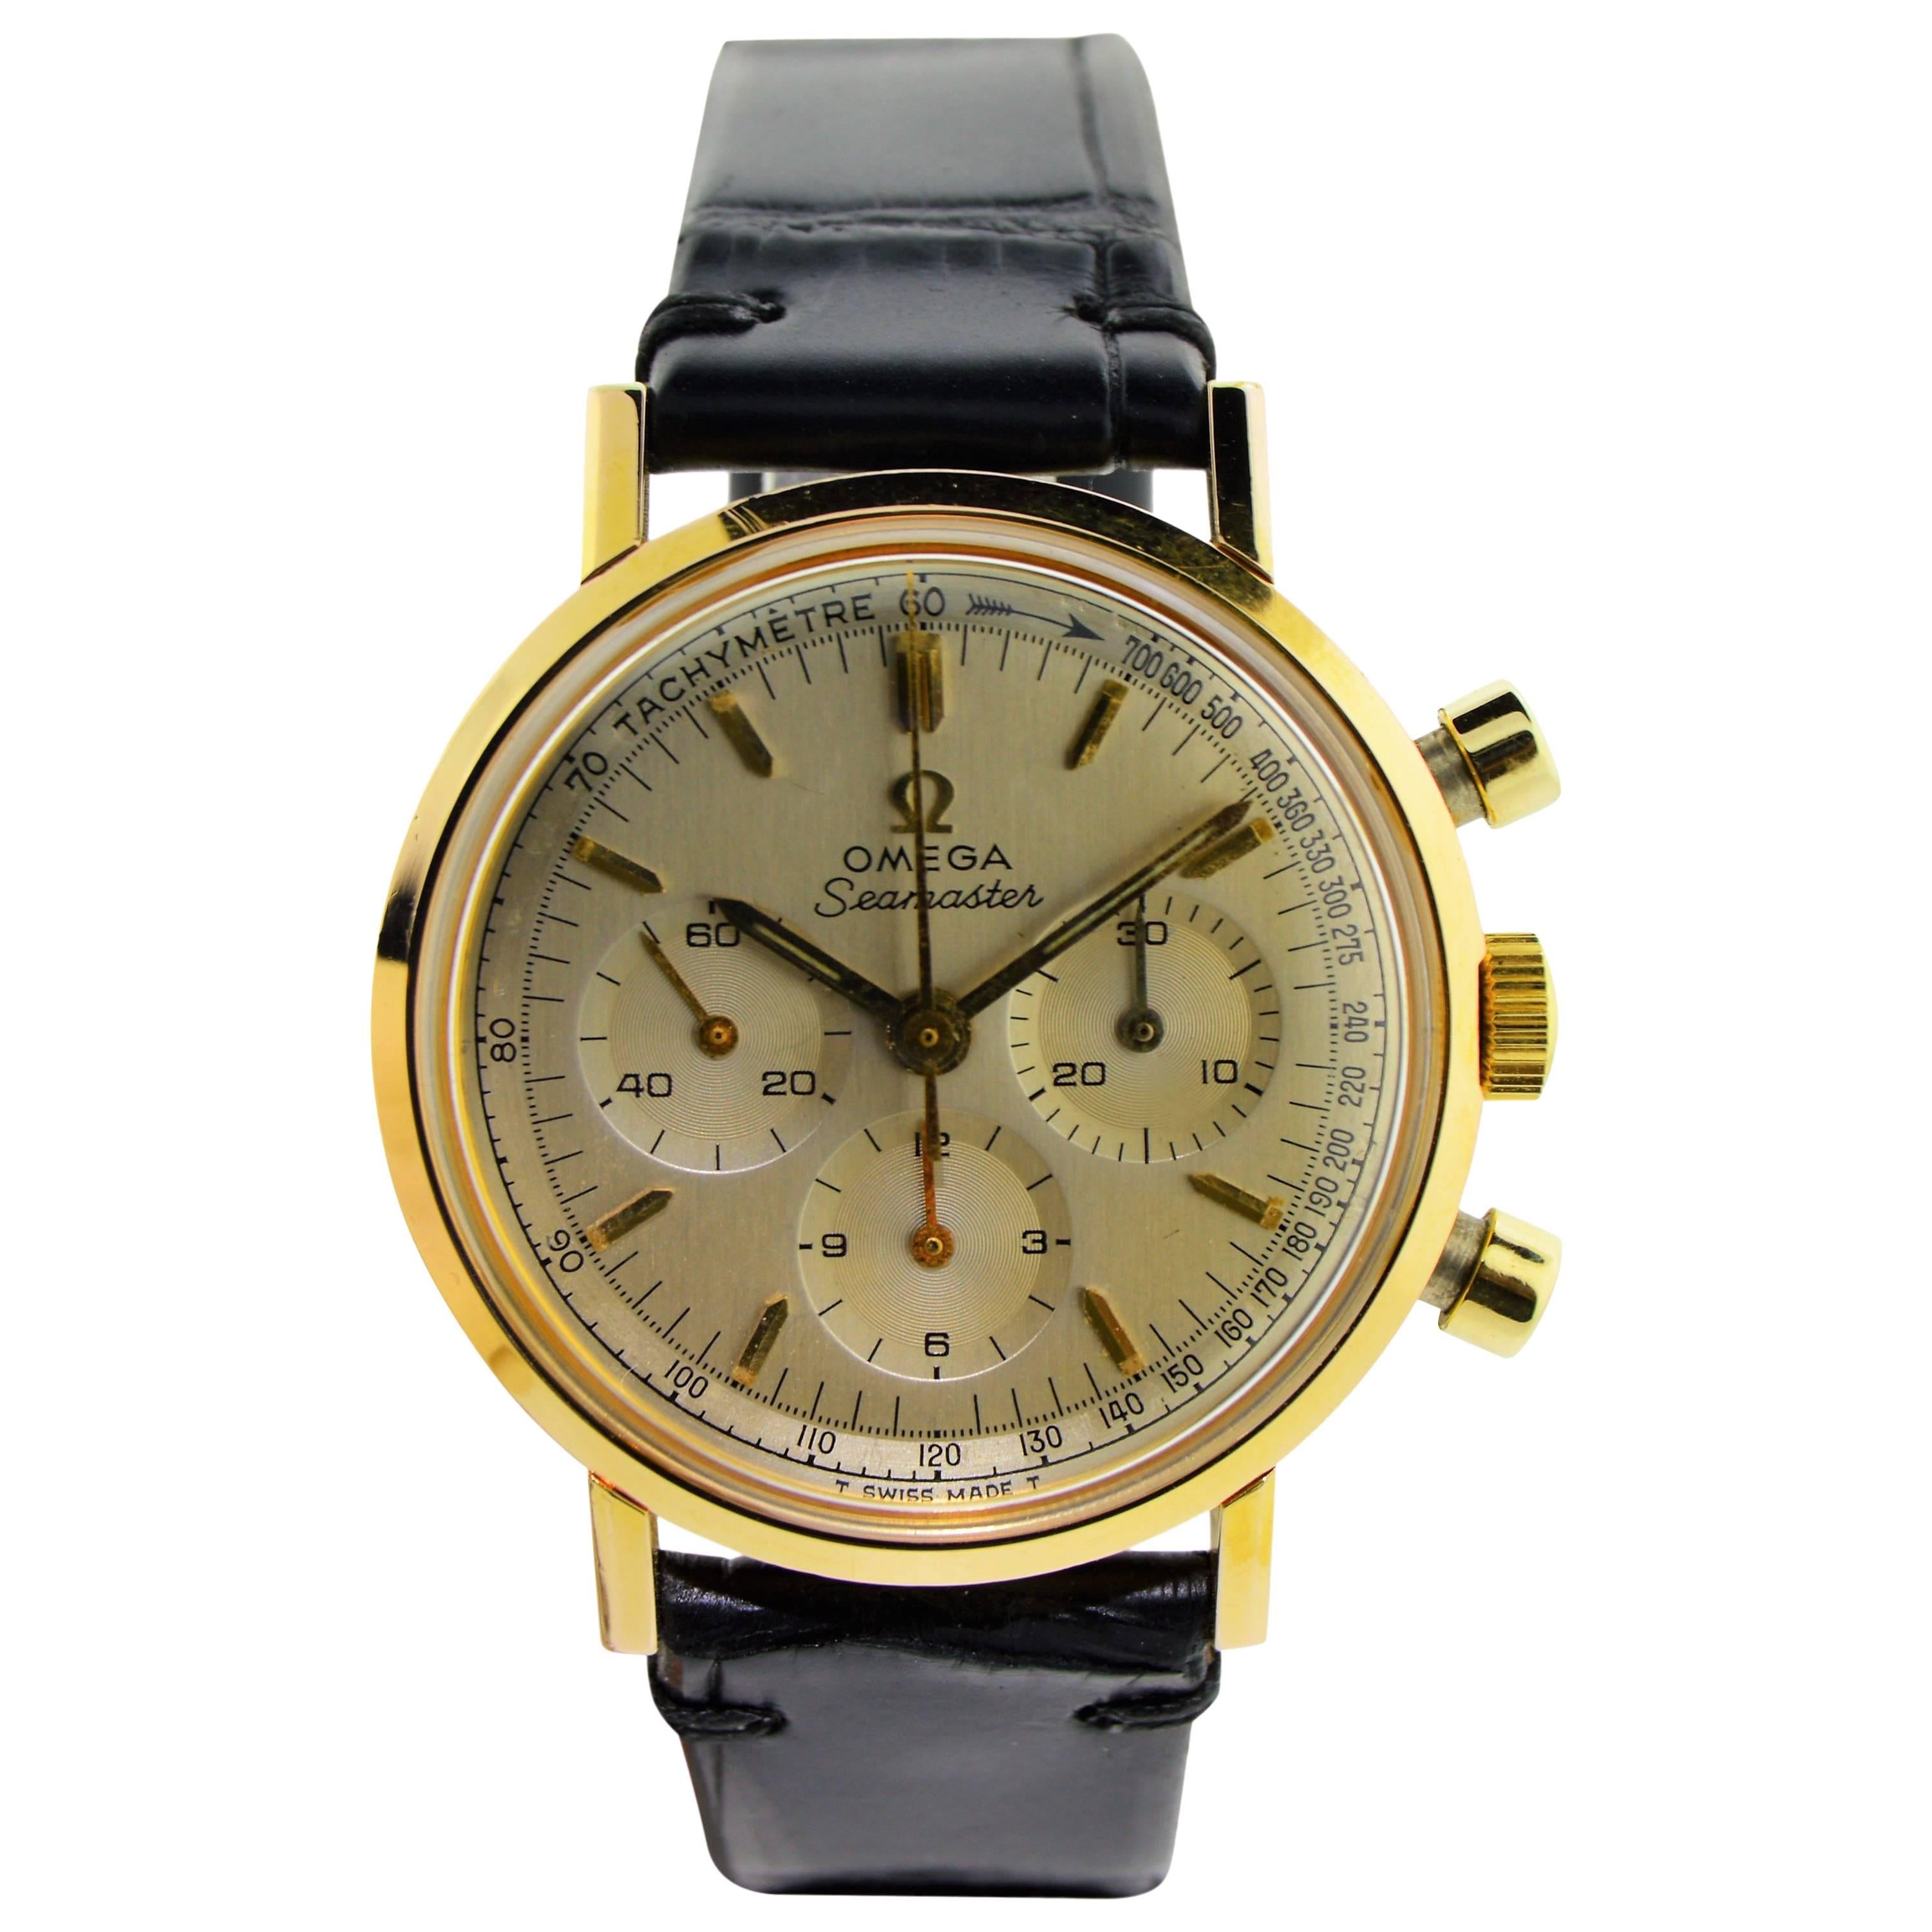 Omega Yellow Gold Filled Chronograph Manual Watch, circa 1960s